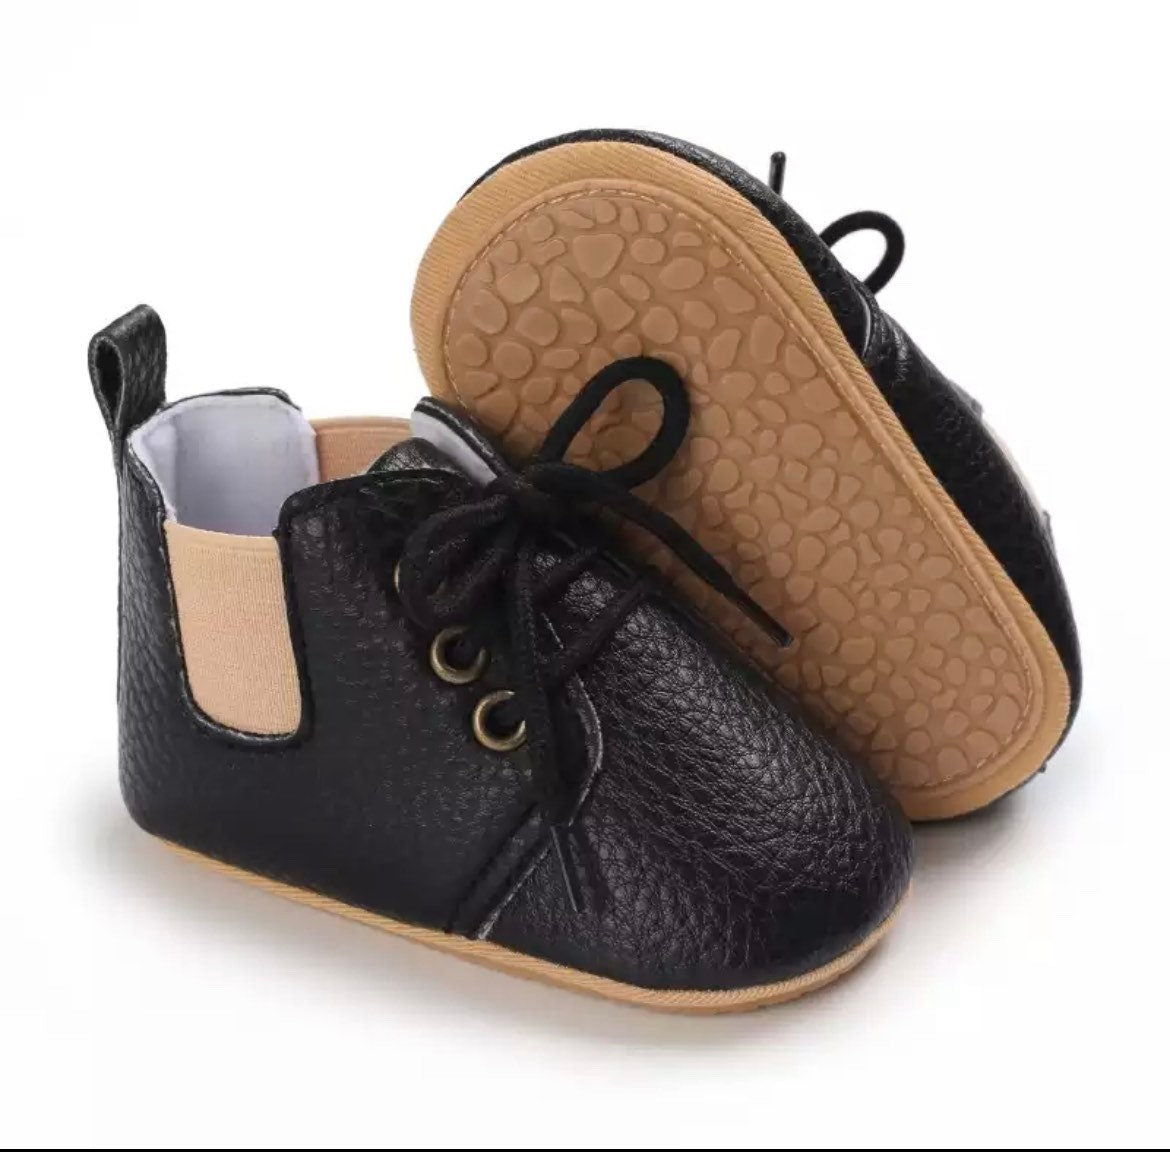 Sparrow Boots - Handmade Baby Boots with Elastic sides and lace ups-Handmade High Quality Leather Baby Shoes, Breathable Upper, First Walker Baby Shoes , Anti-Slip, Baby Shower,  Unisex Baby Shoes.
Welcome! Thanks for looking in our -Bijou Bubs